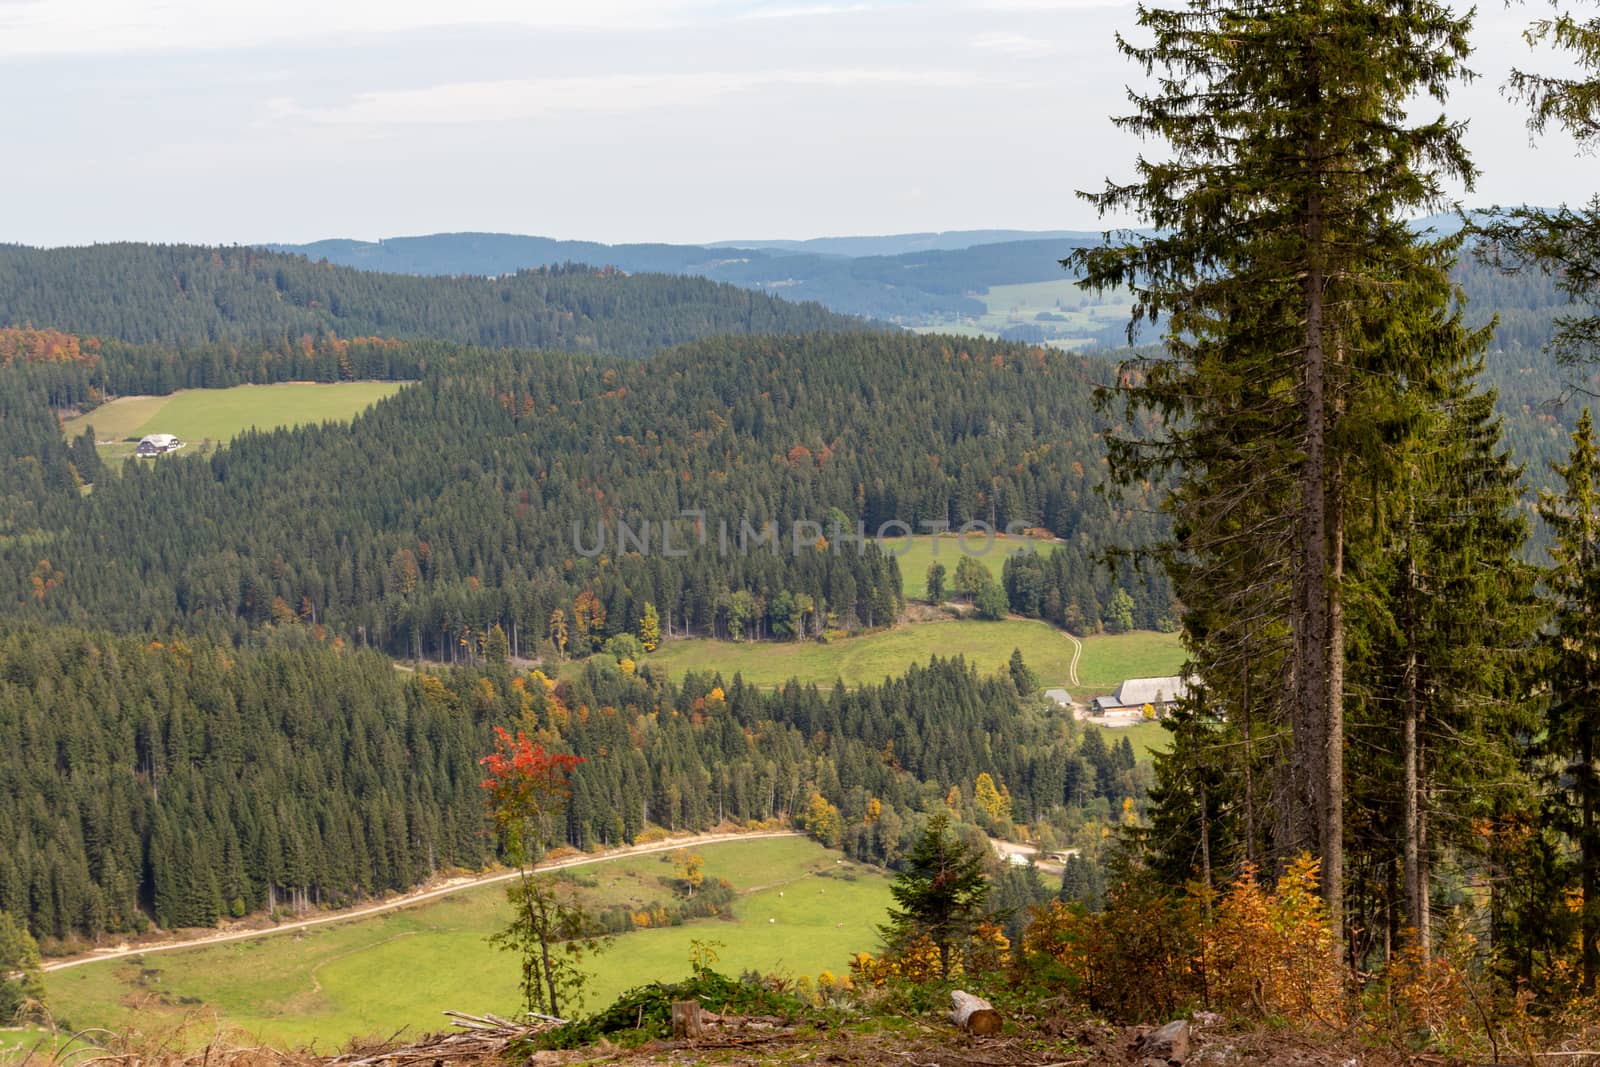 Scenic view at landscape nearby the mountain Feldberg, Black Forest in autumn with multi colored trees